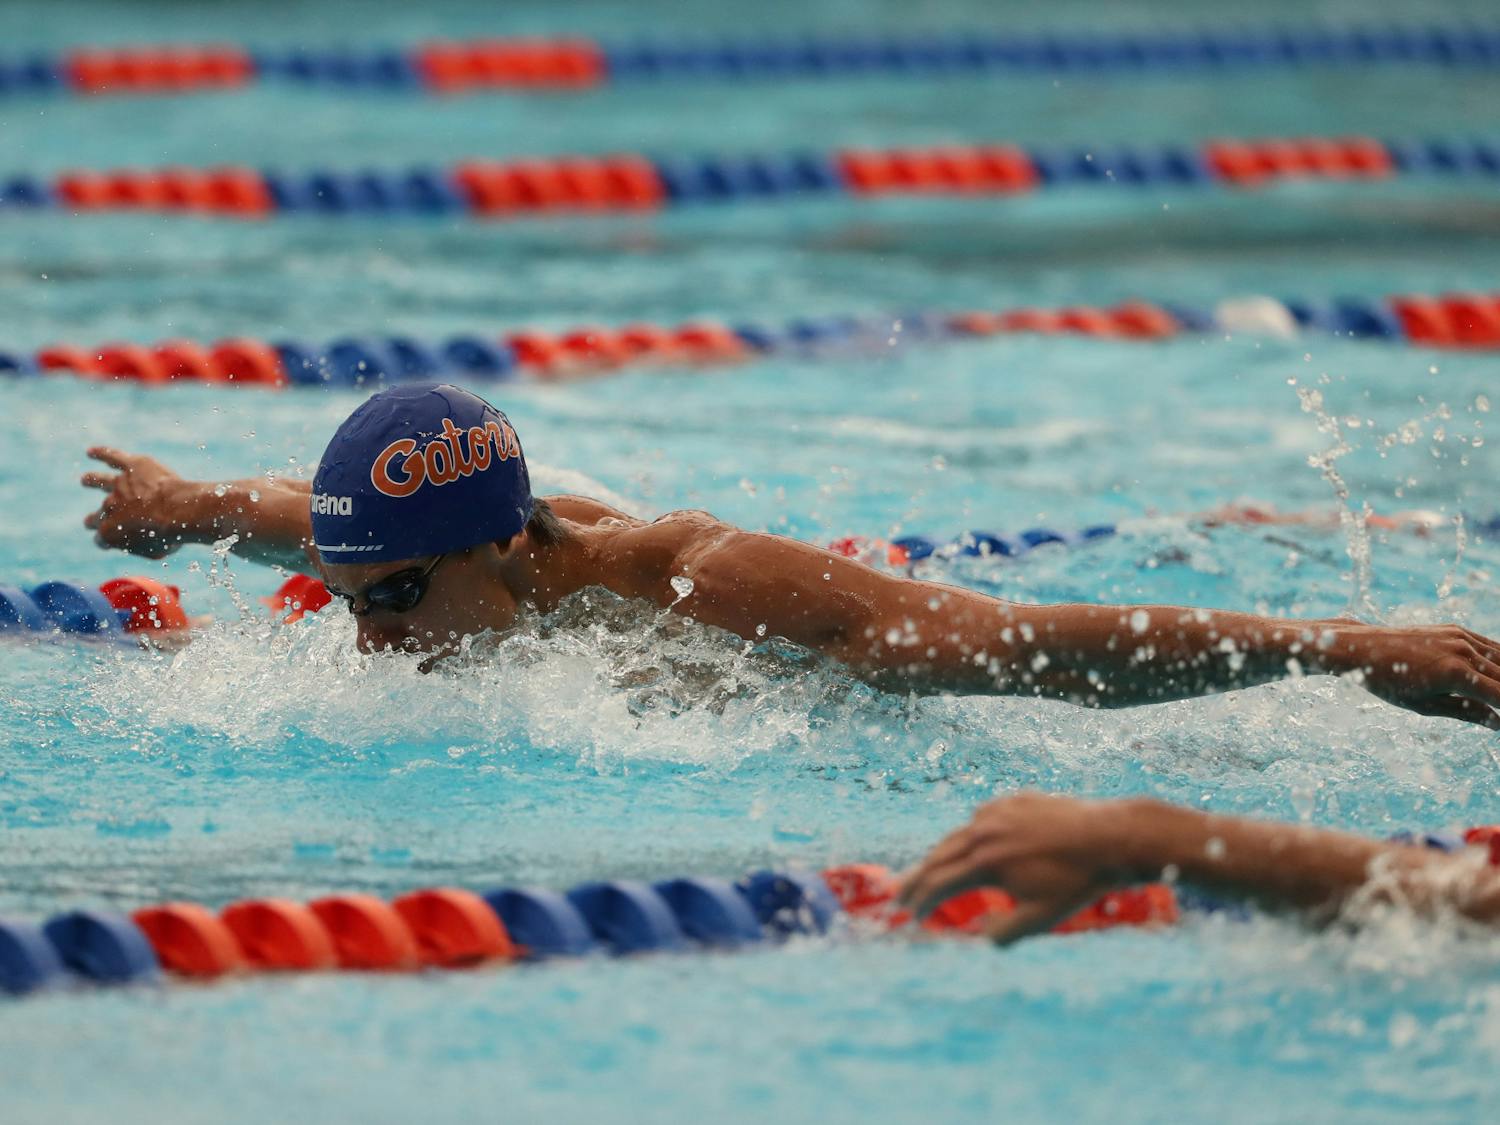 A Florida swimmer competes at the Stephen C. O’Connell Center Natatorium in Gainesville, FL / UAA Communications photo by Hannah White